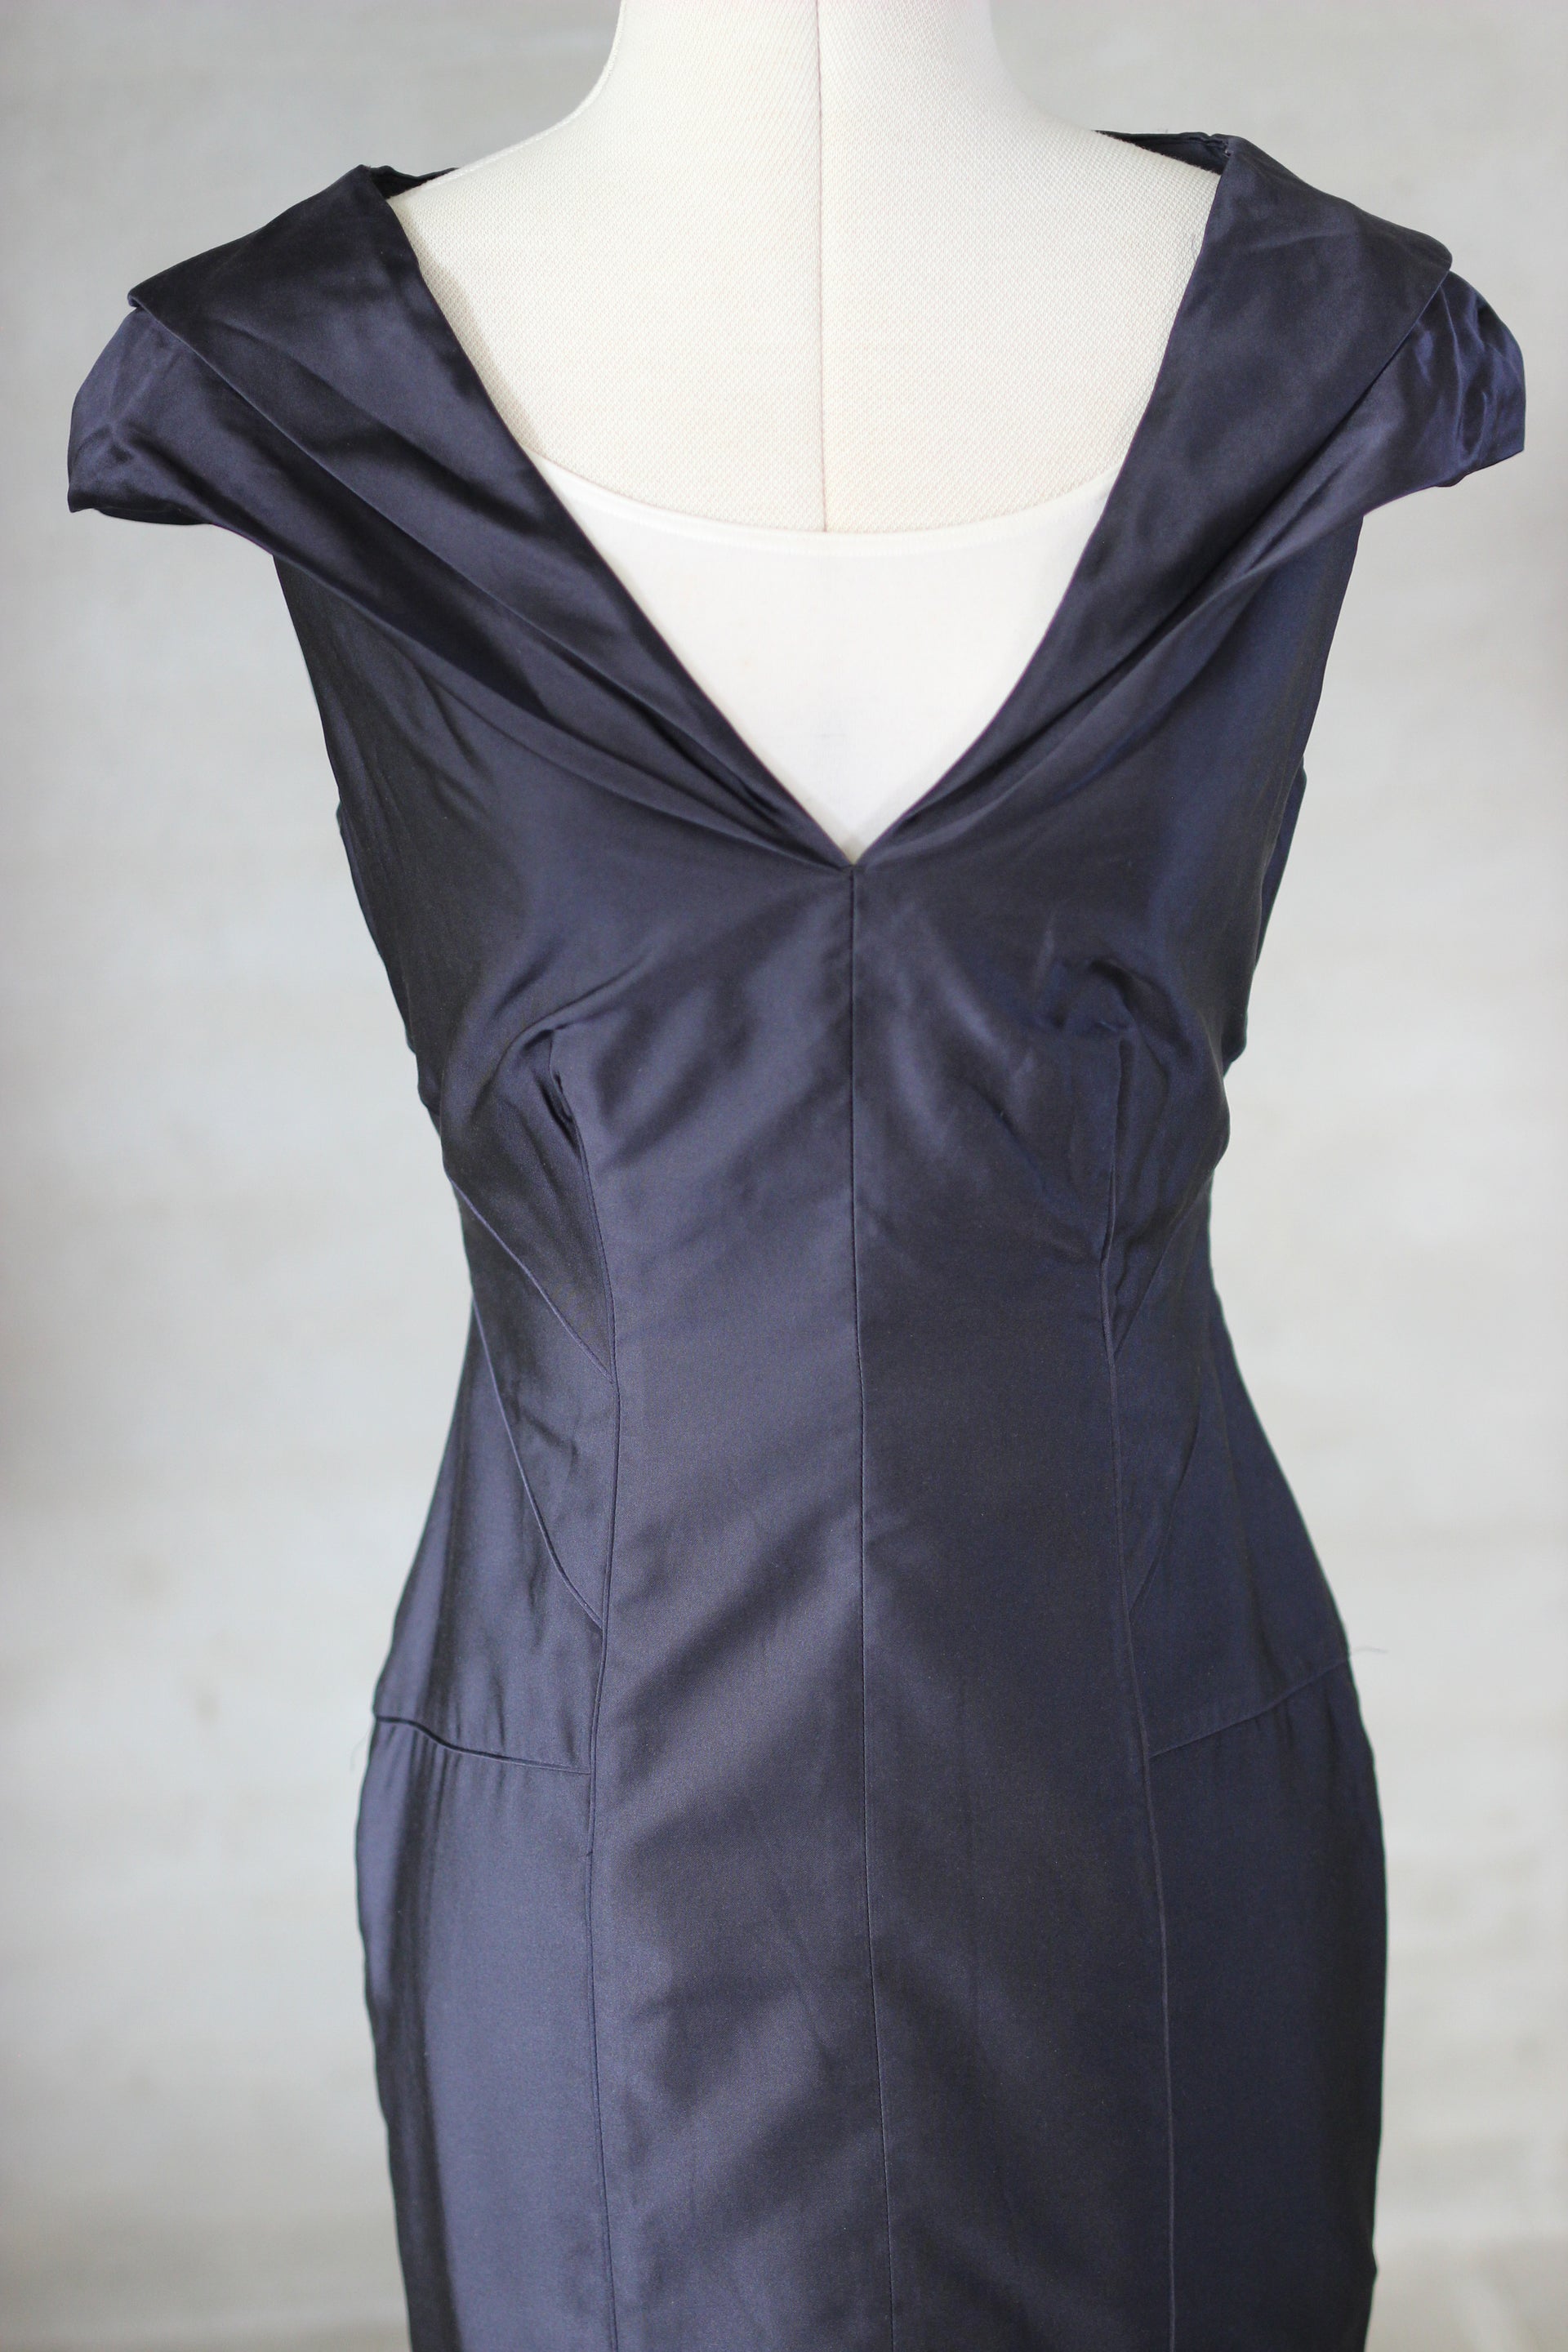 1980s Navy Blue Silk Dress//Made in Italy//Size S